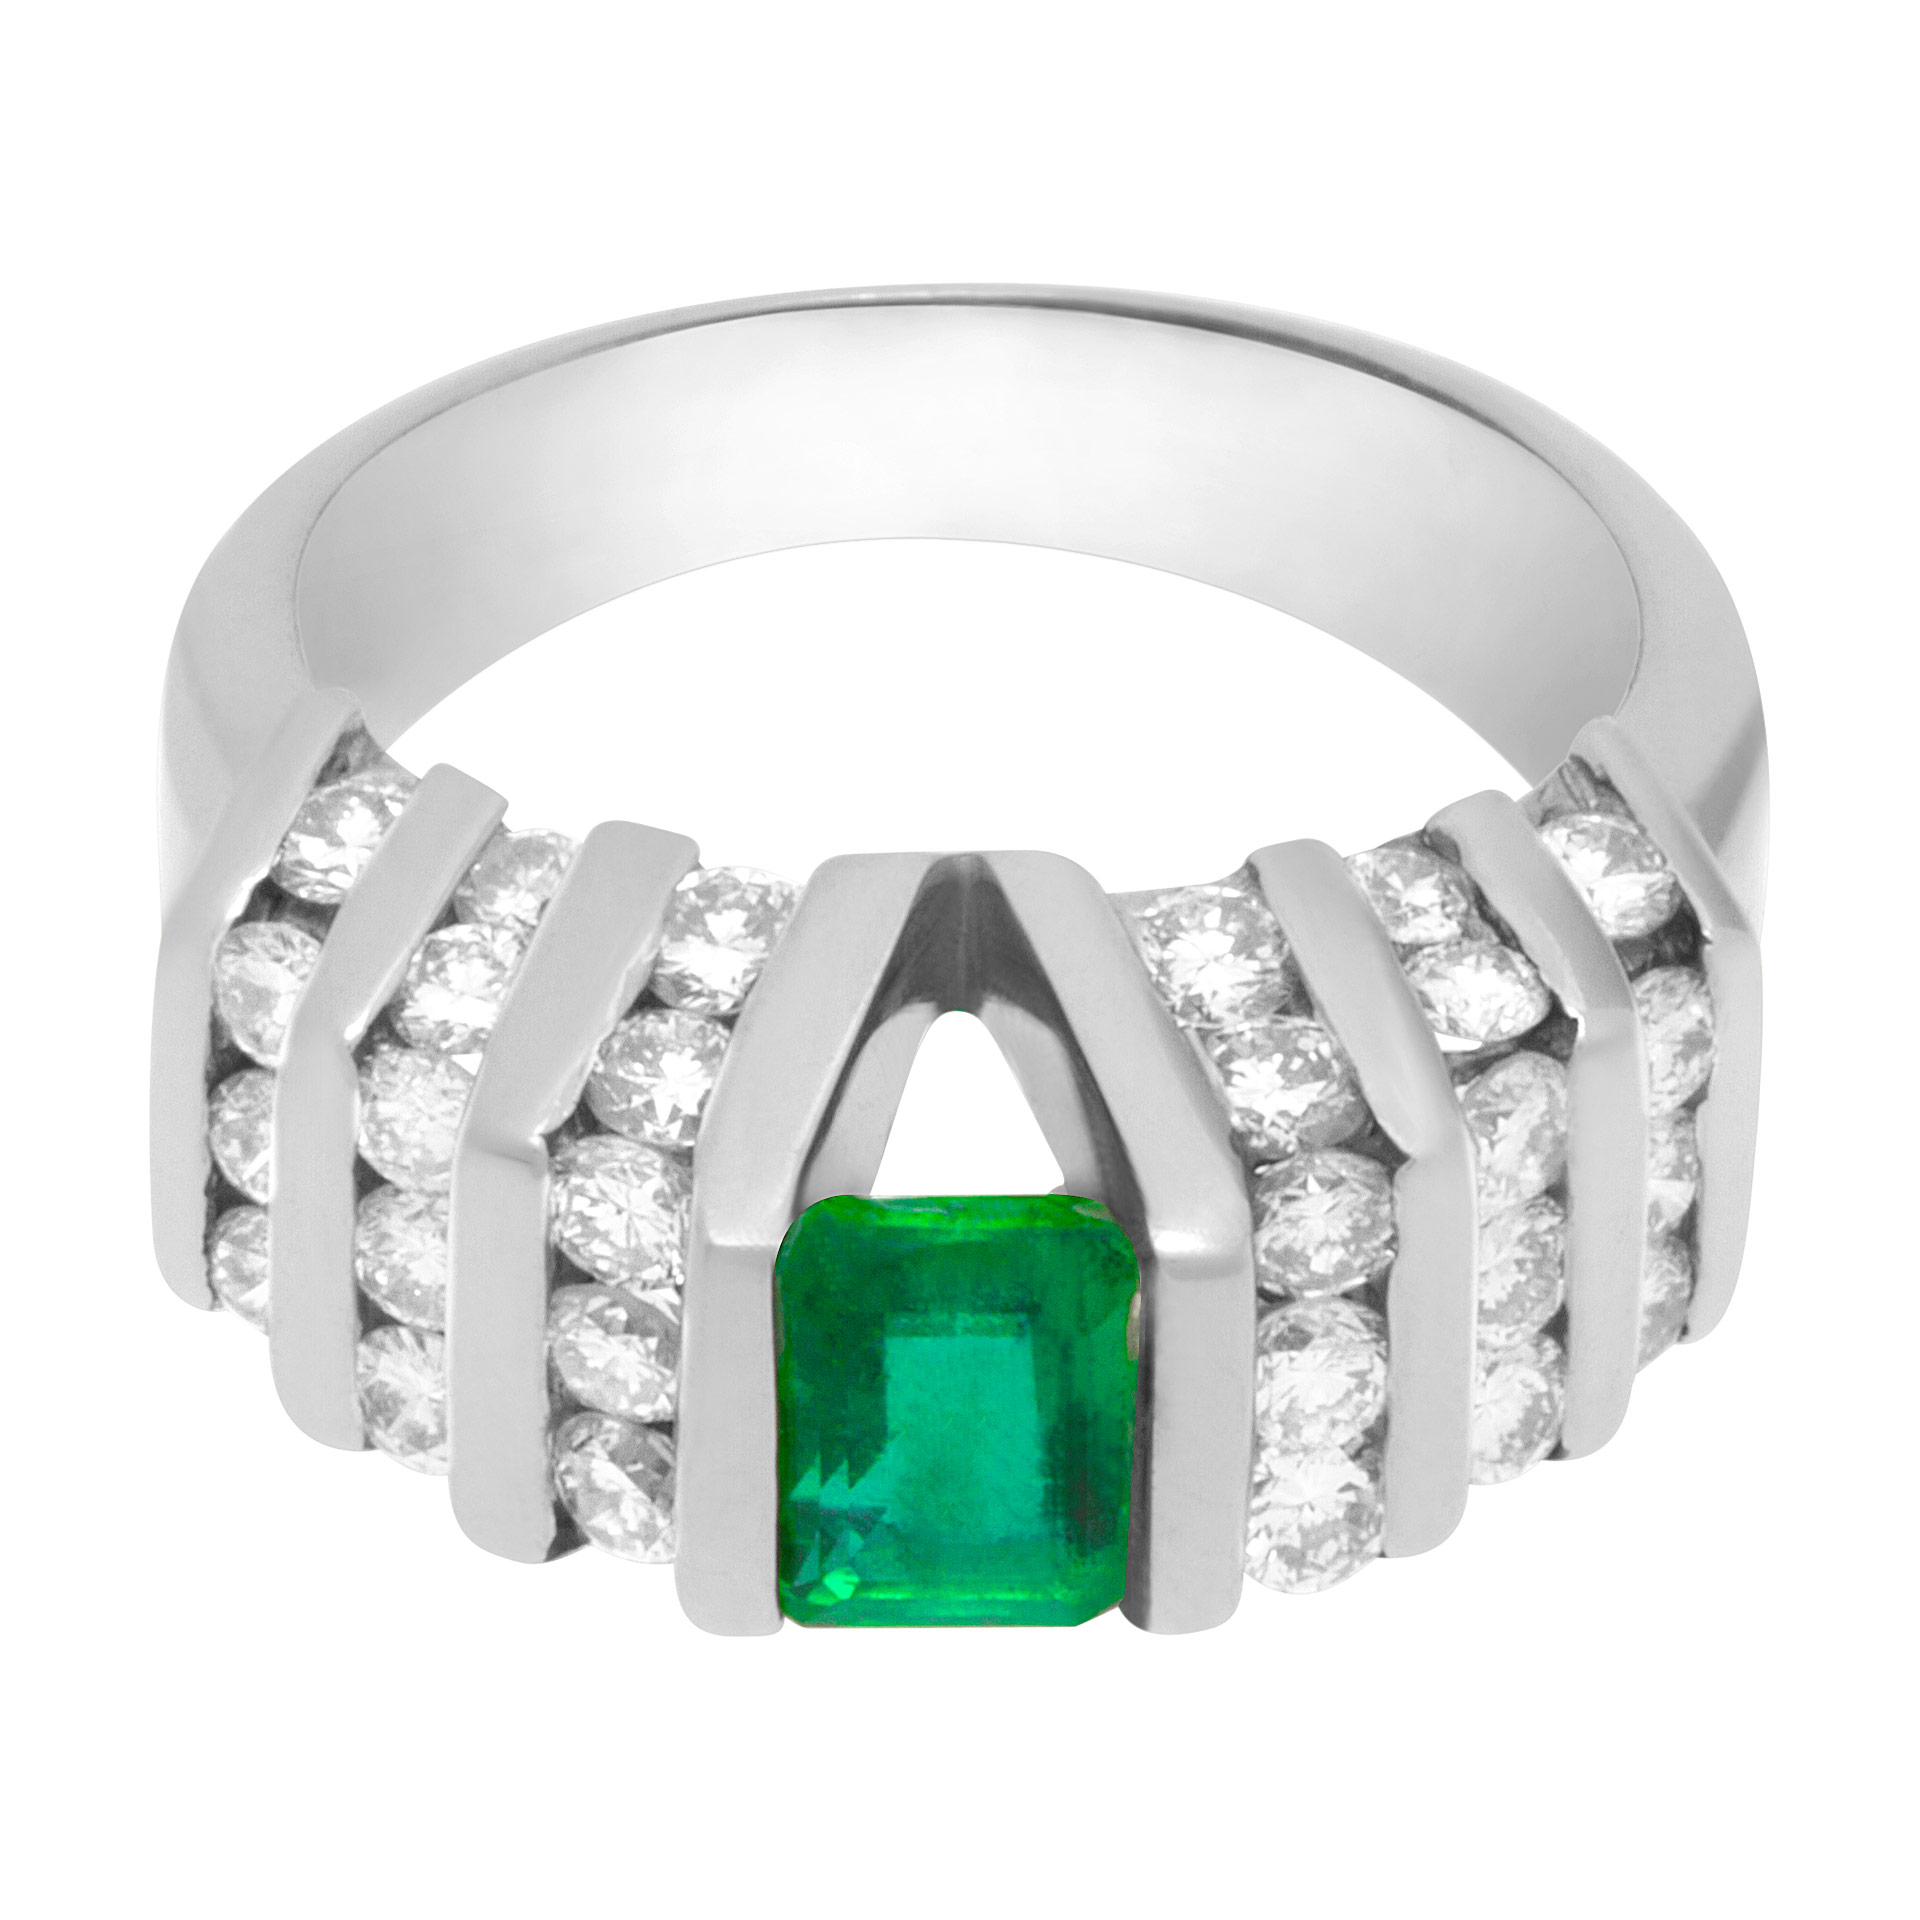 Emerald and diamond ring in 14k white gold w/ approx. 0.75 ct emerald and 1.14 cts in diamonds. image 1